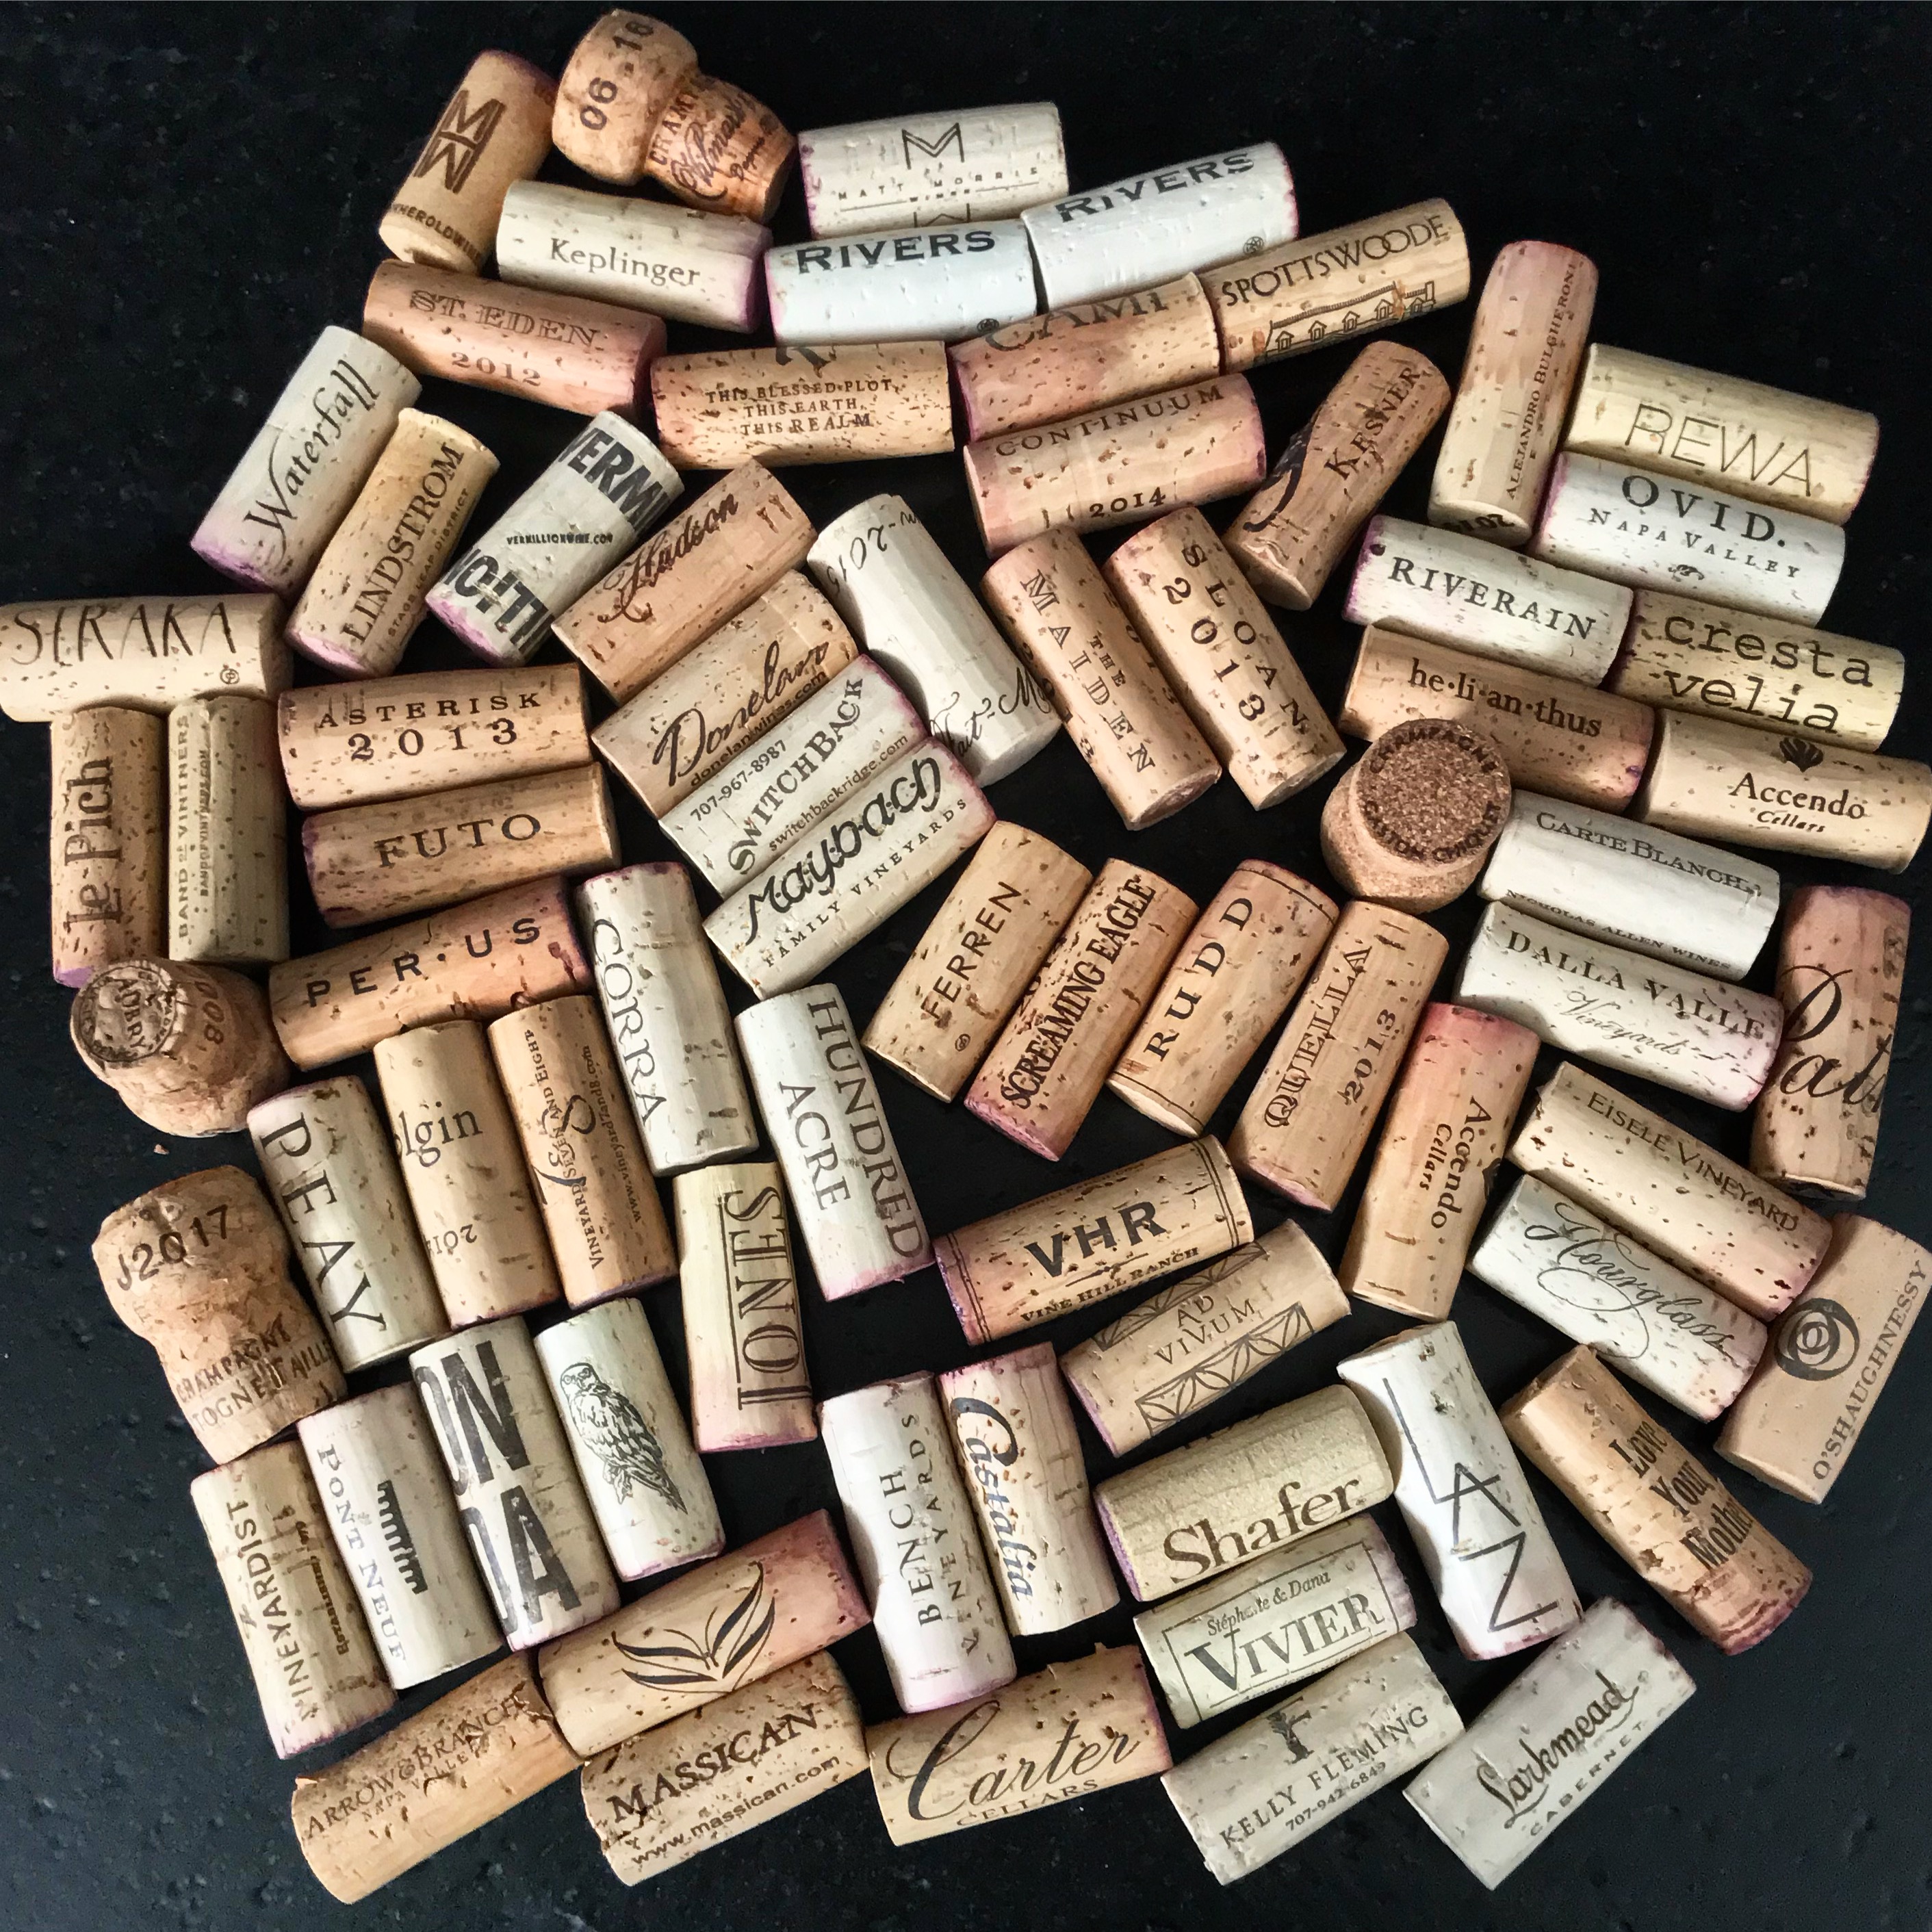 K. Laz Wine Collection - A table for of wine bottle corks